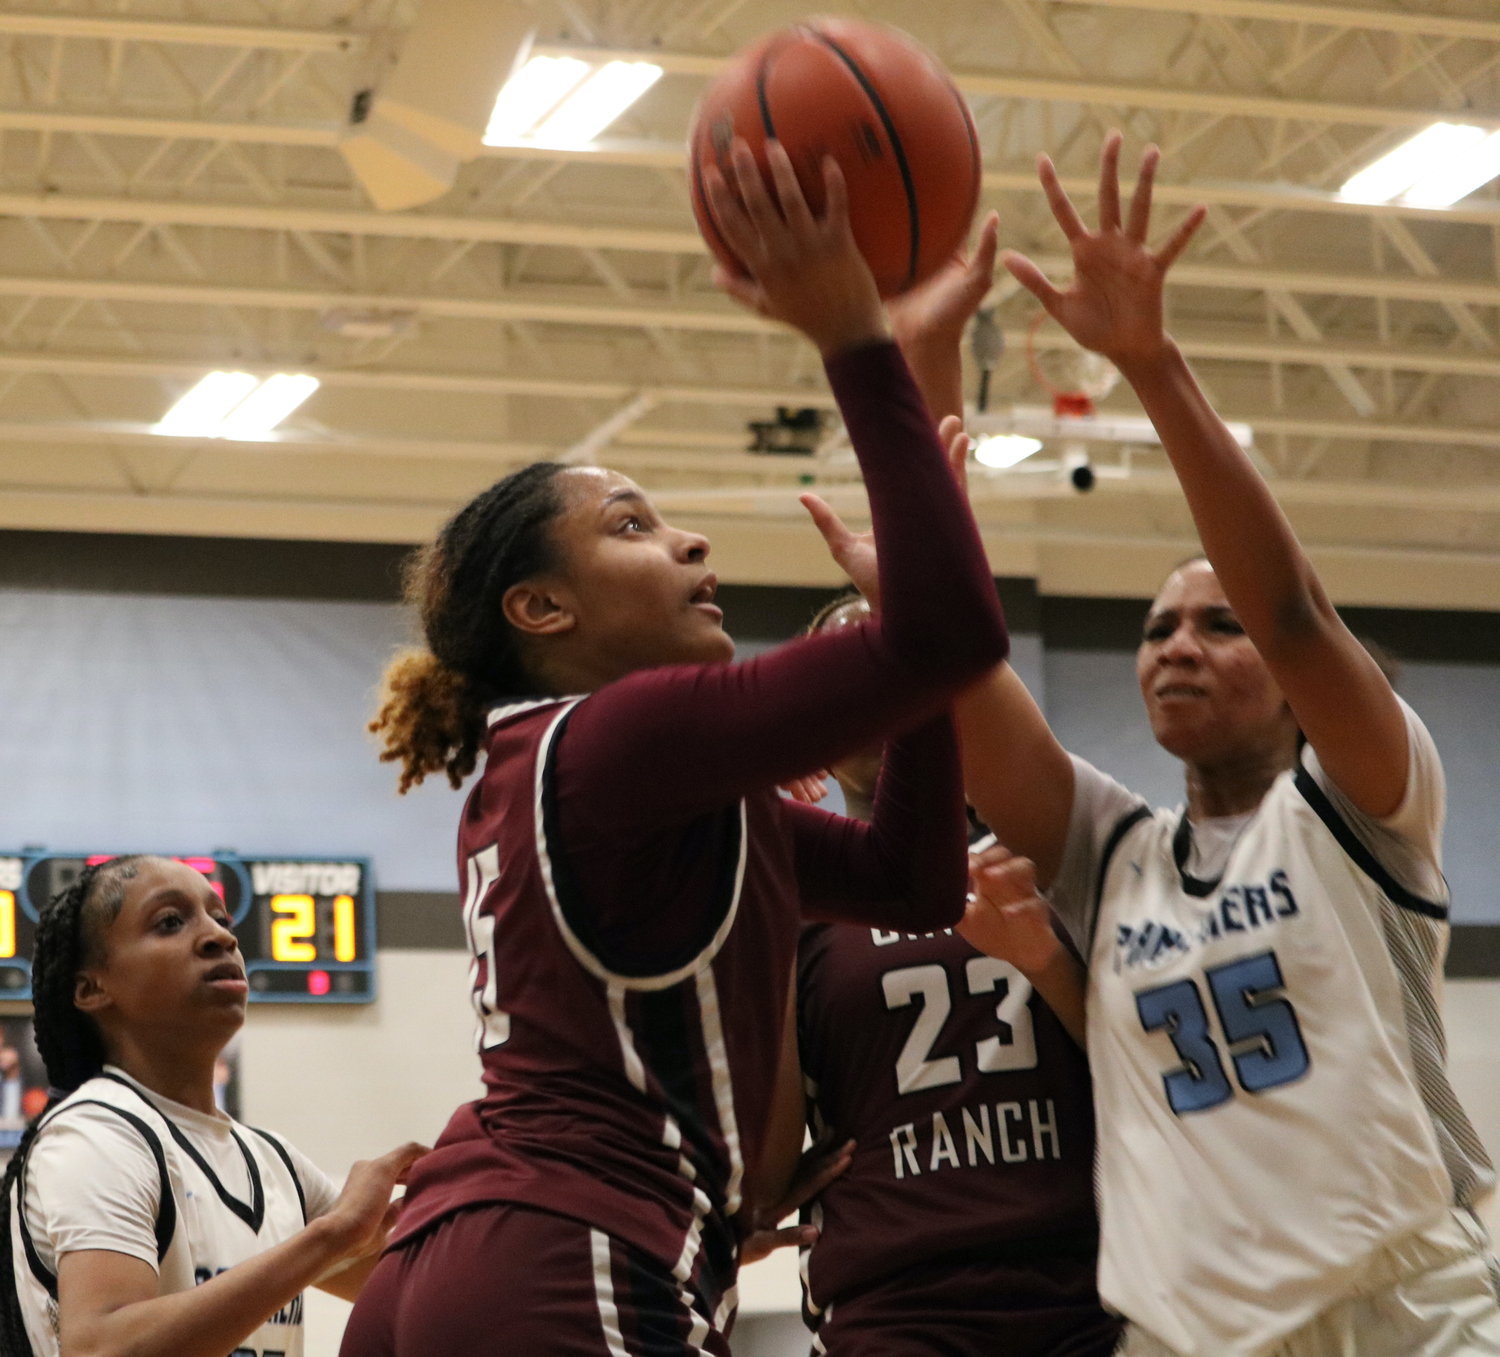 Dani Williams goes up for a layup during Friday's game between Cinco Ranch and Paetow at the Paetow gym.